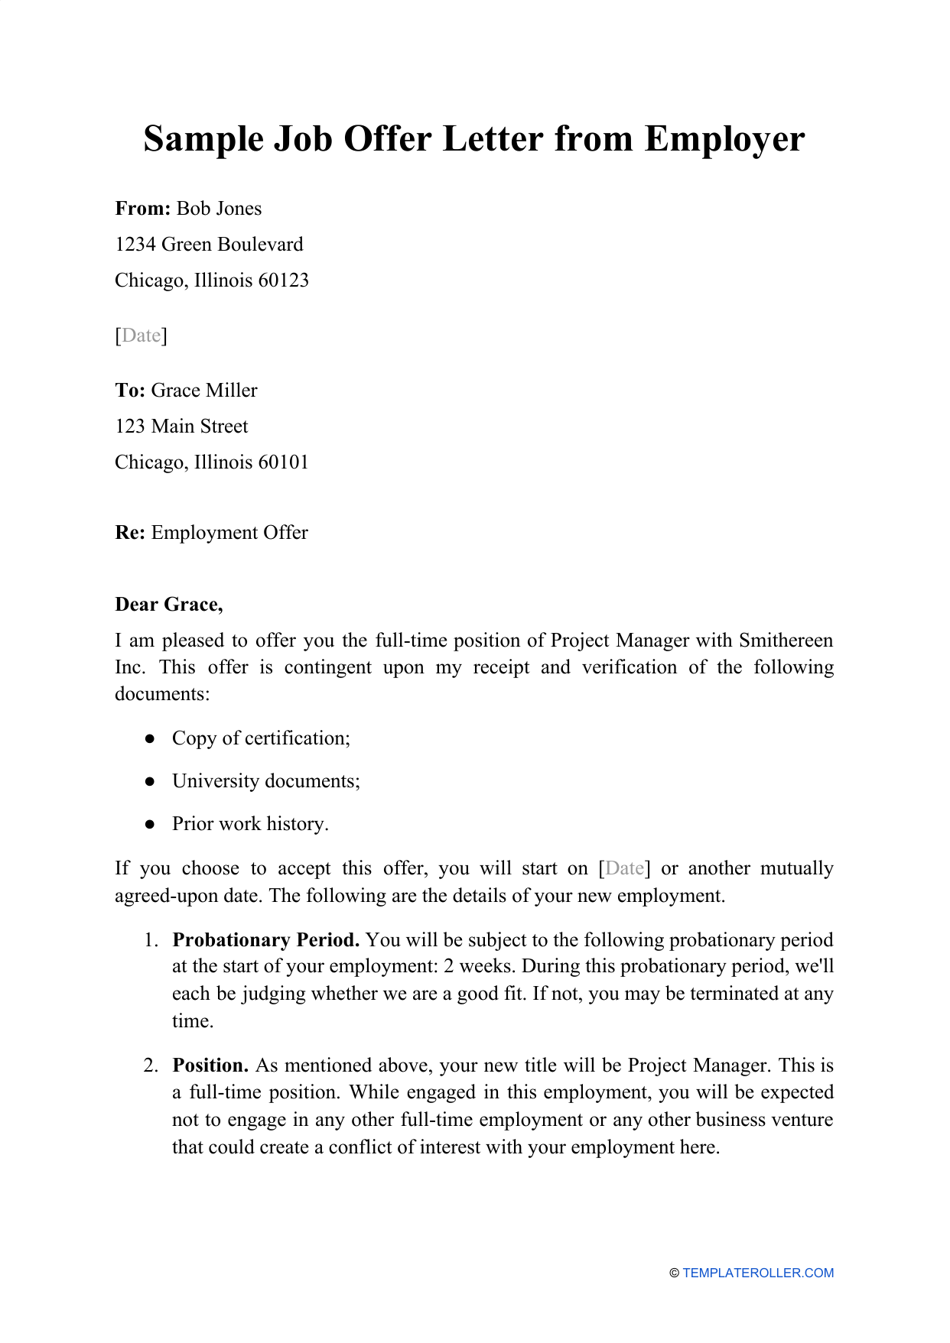 Sample Job Offer Letter From Employer, Page 1